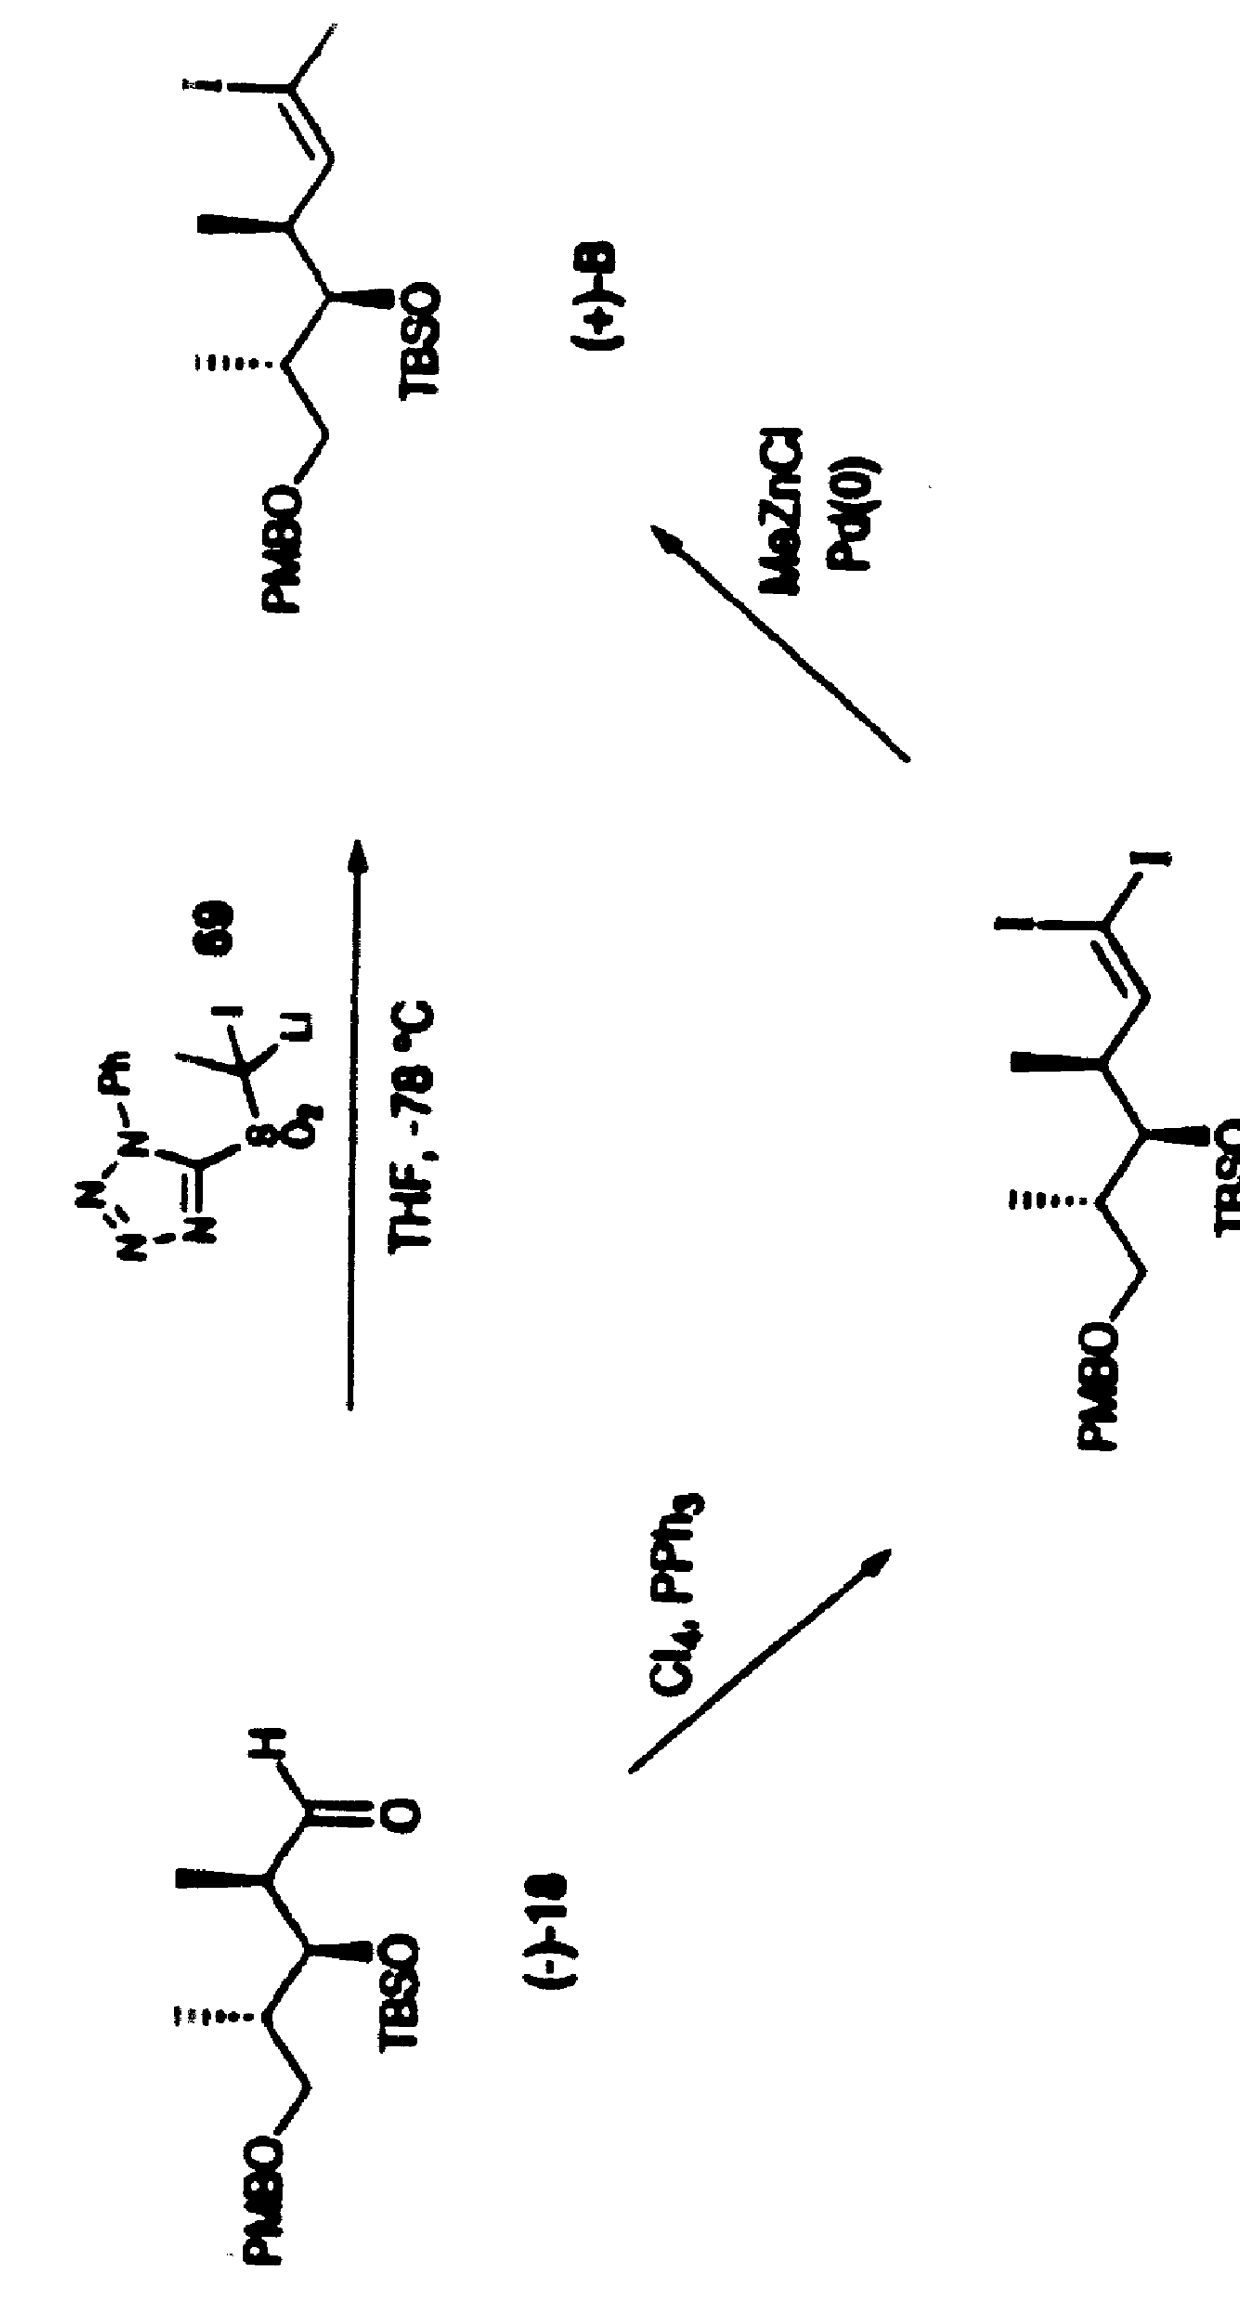 Synthetic techniques and intermediates for polyhydroxy, dienyl lactone derivatives